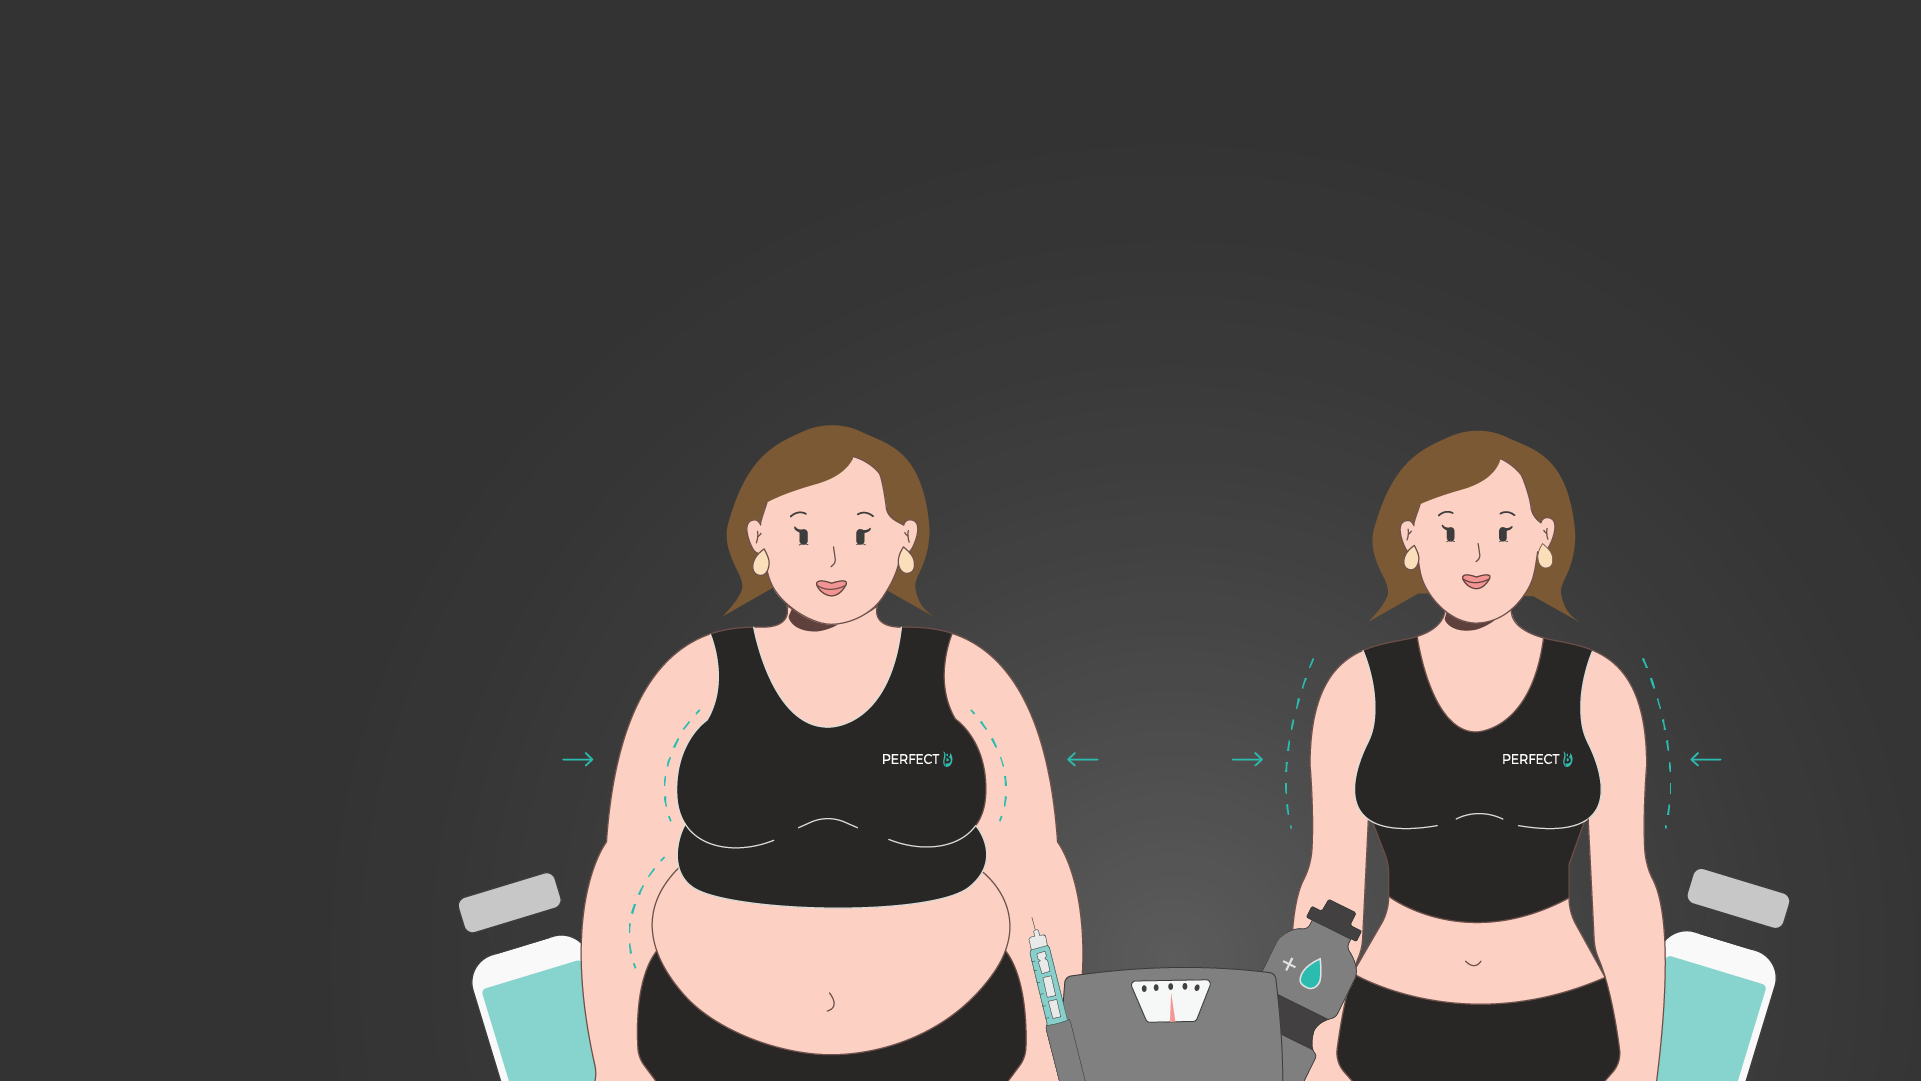 Perfect B - Weight Loss Treatment - Ilustration Featured Image